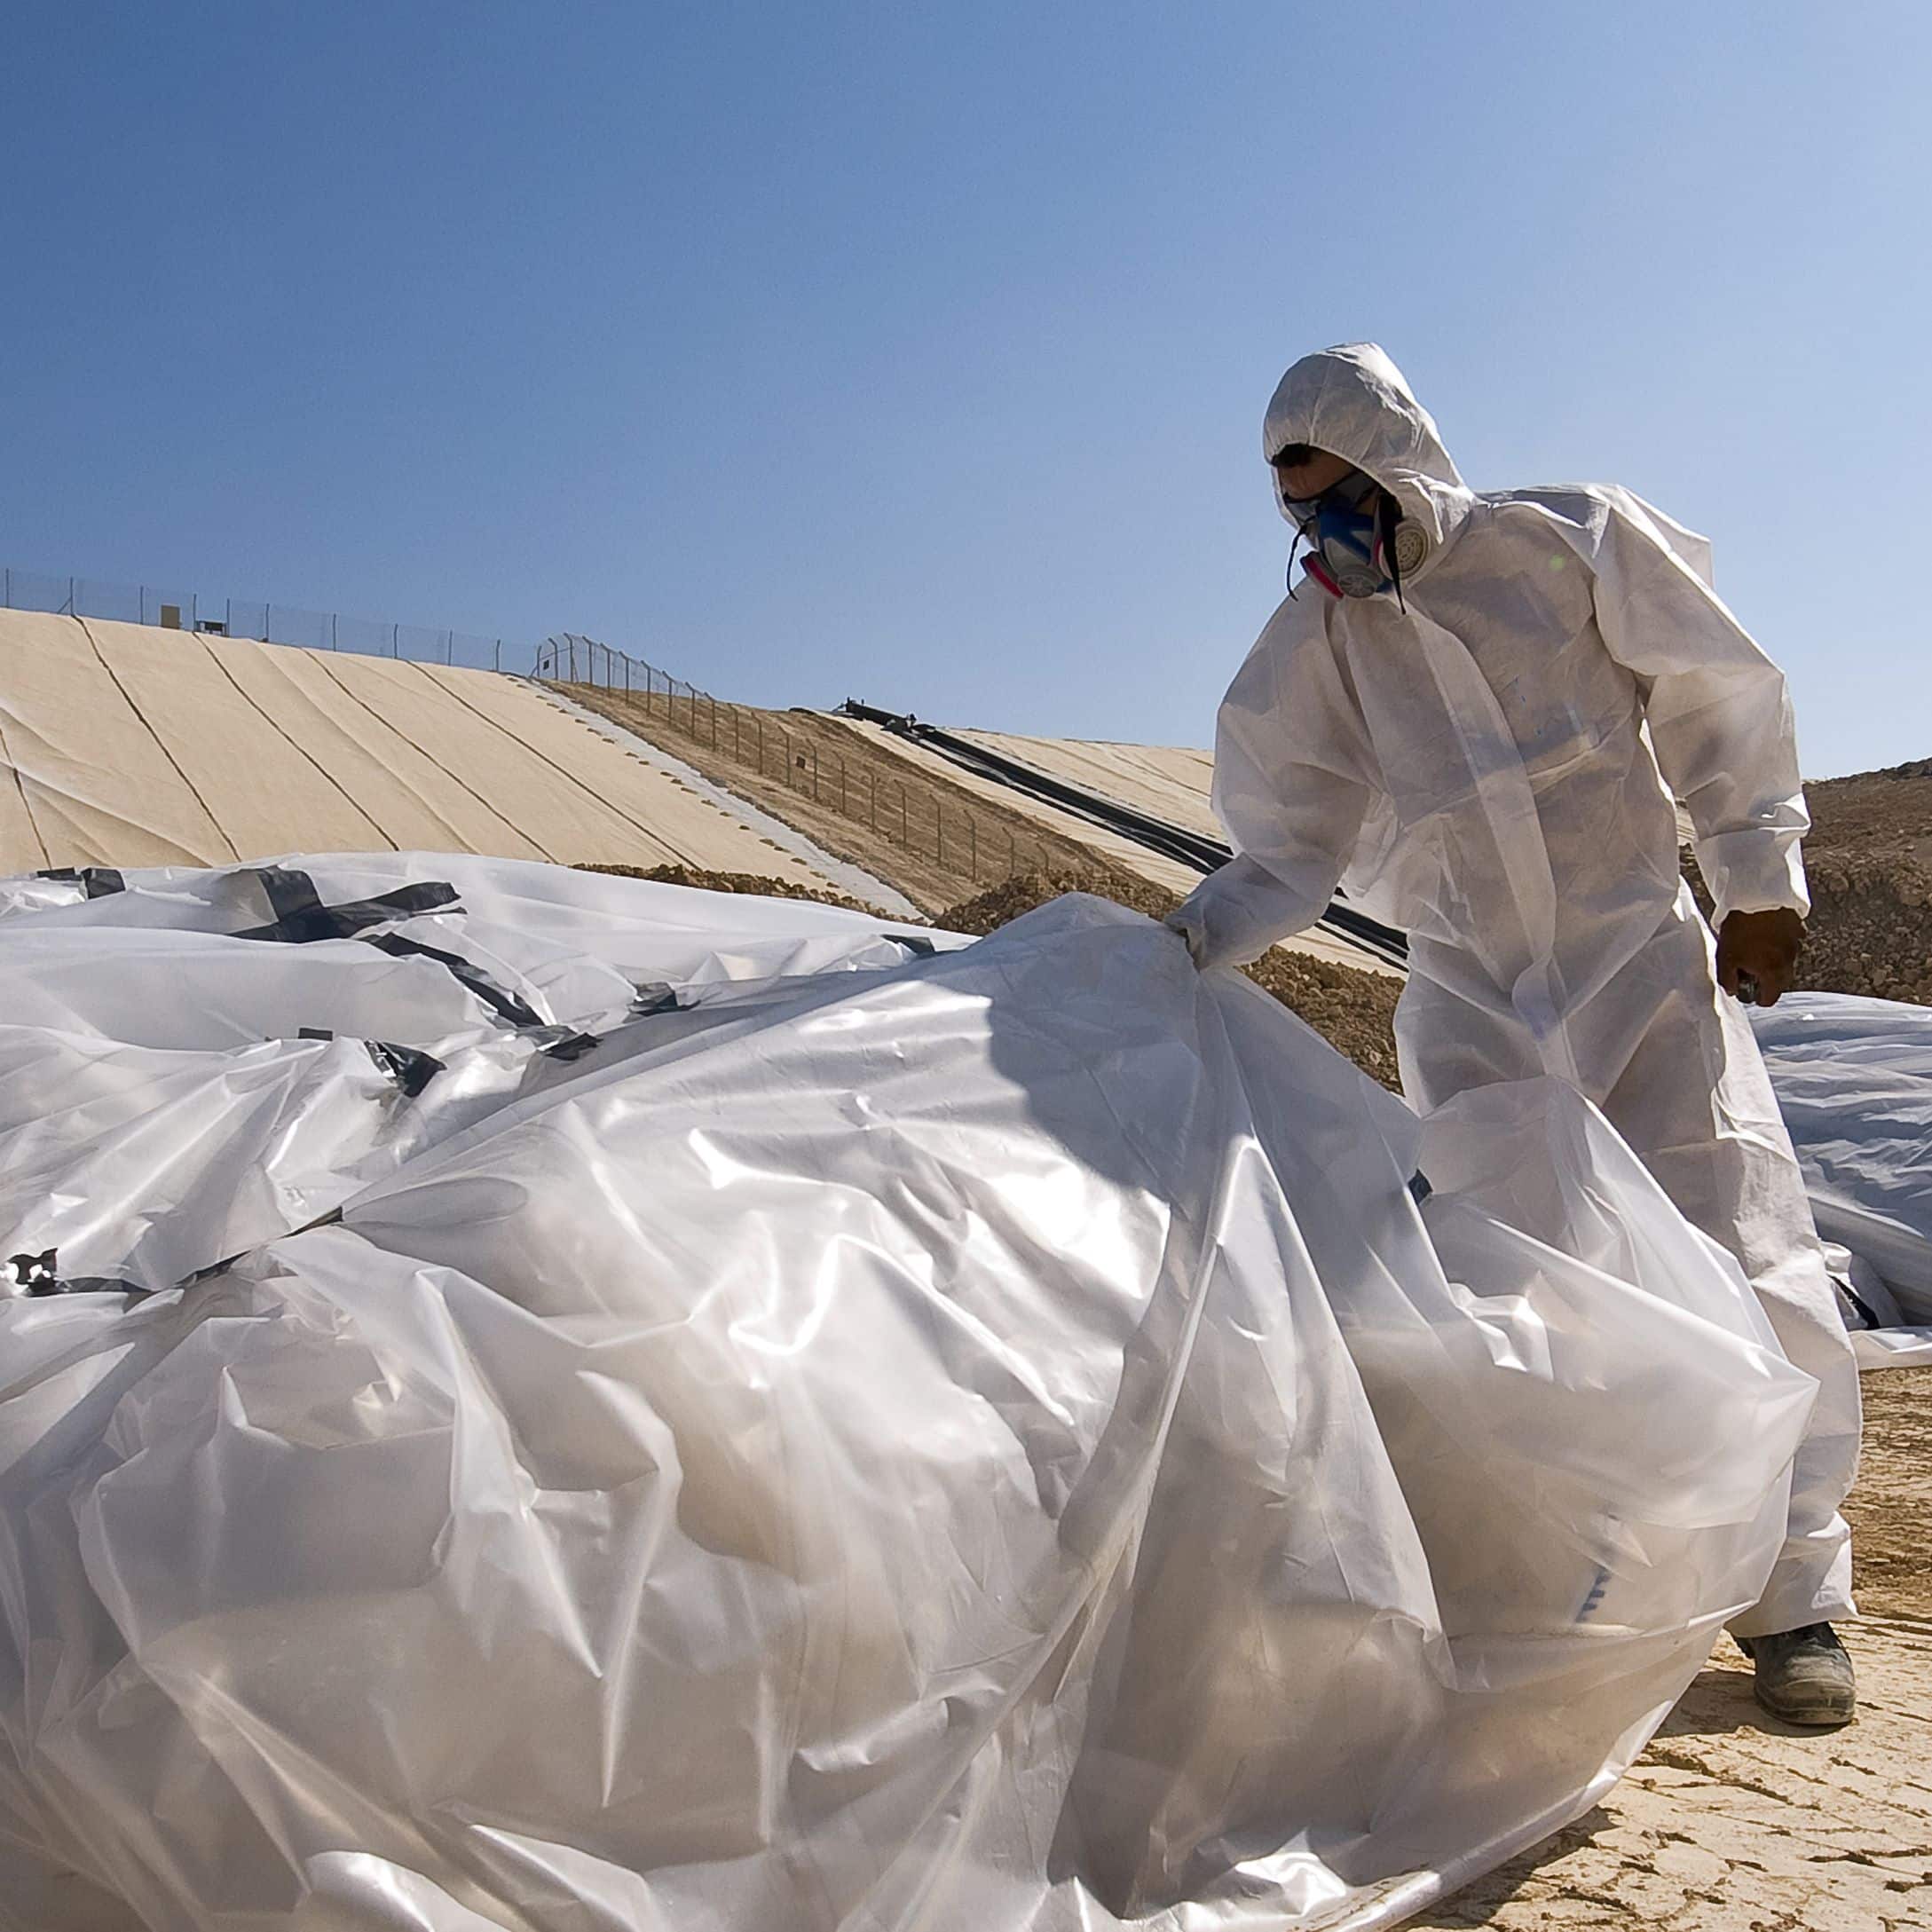 Image of Asbestos Removal and Storing for Learn Q Asbestos Safety Responsibilities of Employers and Business Owners blog